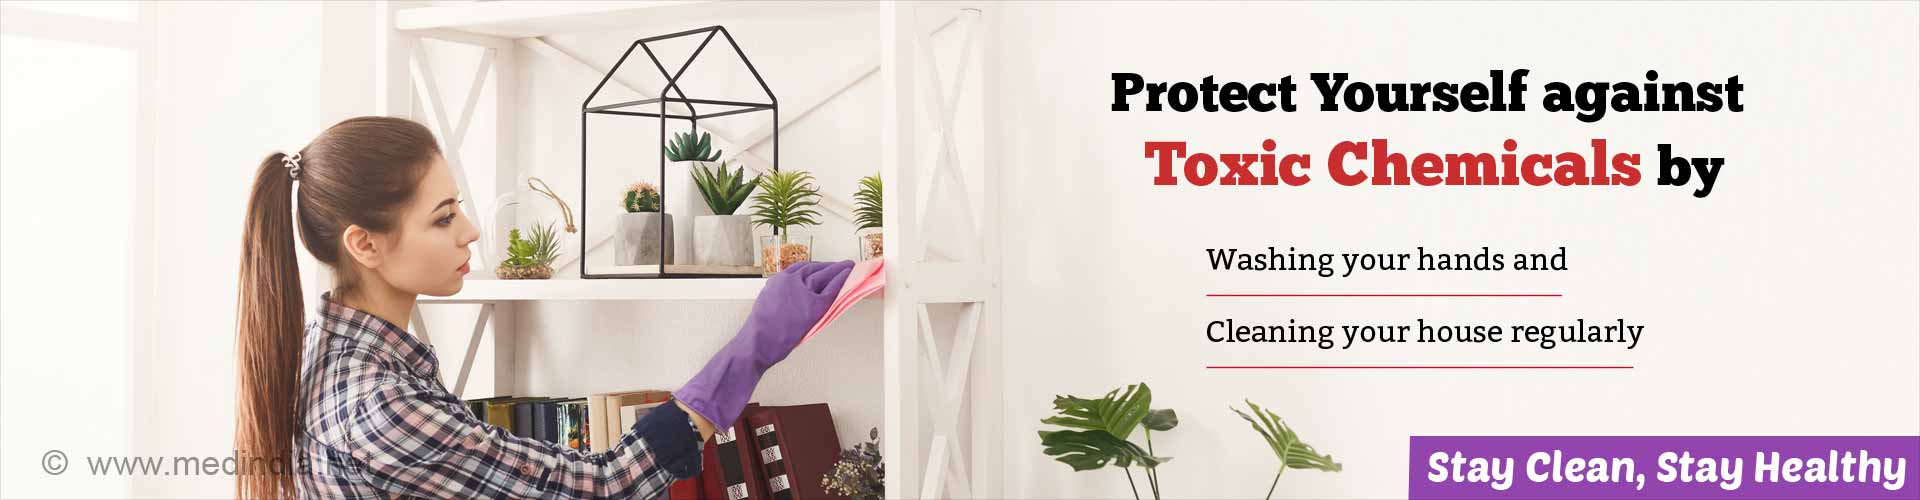 Protect yourself against toxic chemicals by washing your hands and cleaning your house regularly.